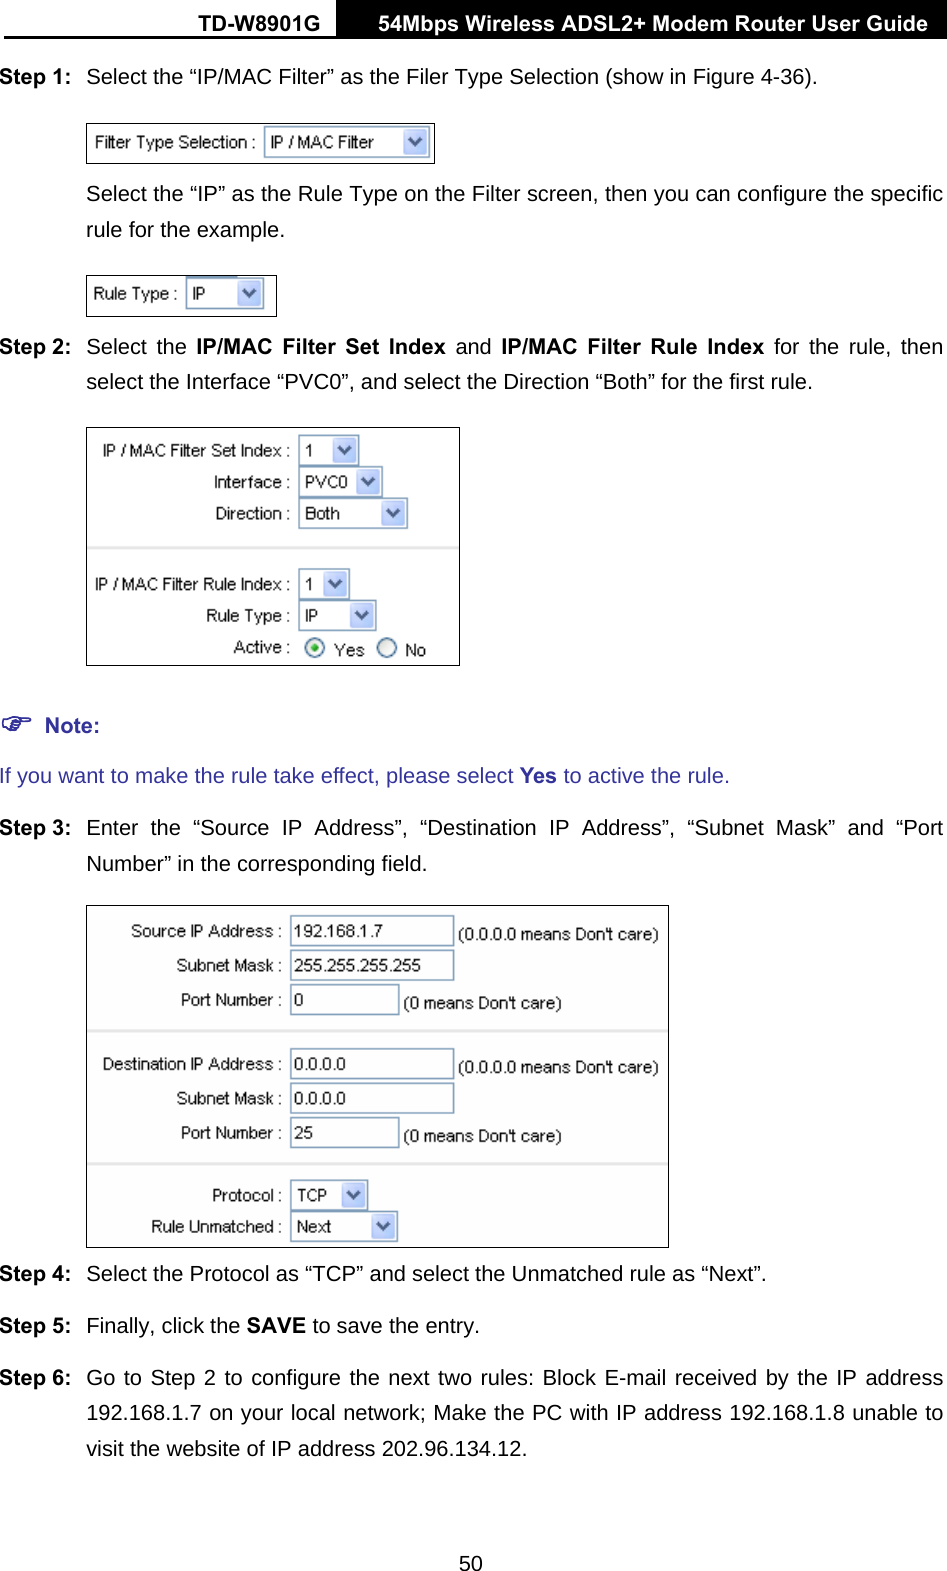 TD-W8901G   54Mbps Wireless ADSL2+ Modem Router User Guide 50 Step 1:  Select the “IP/MAC Filter” as the Filer Type Selection (show in Figure 4-36).  Select the “IP” as the Rule Type on the Filter screen, then you can configure the specific rule for the example.  Step 2:  Select the IP/MAC Filter Set Index and IP/MAC Filter Rule Index for the rule, then select the Interface “PVC0”, and select the Direction “Both” for the first rule.  ) Note: If you want to make the rule take effect, please select Yes to active the rule. Step 3:  Enter the “Source IP Address”, “Destination IP Address”, “Subnet Mask” and “Port Number” in the corresponding field.  Step 4:  Select the Protocol as “TCP” and select the Unmatched rule as “Next”. Step 5:  Finally, click the SAVE to save the entry. Step 6:  Go to Step 2 to configure the next two rules: Block E-mail received by the IP address 192.168.1.7 on your local network; Make the PC with IP address 192.168.1.8 unable to visit the website of IP address 202.96.134.12. 